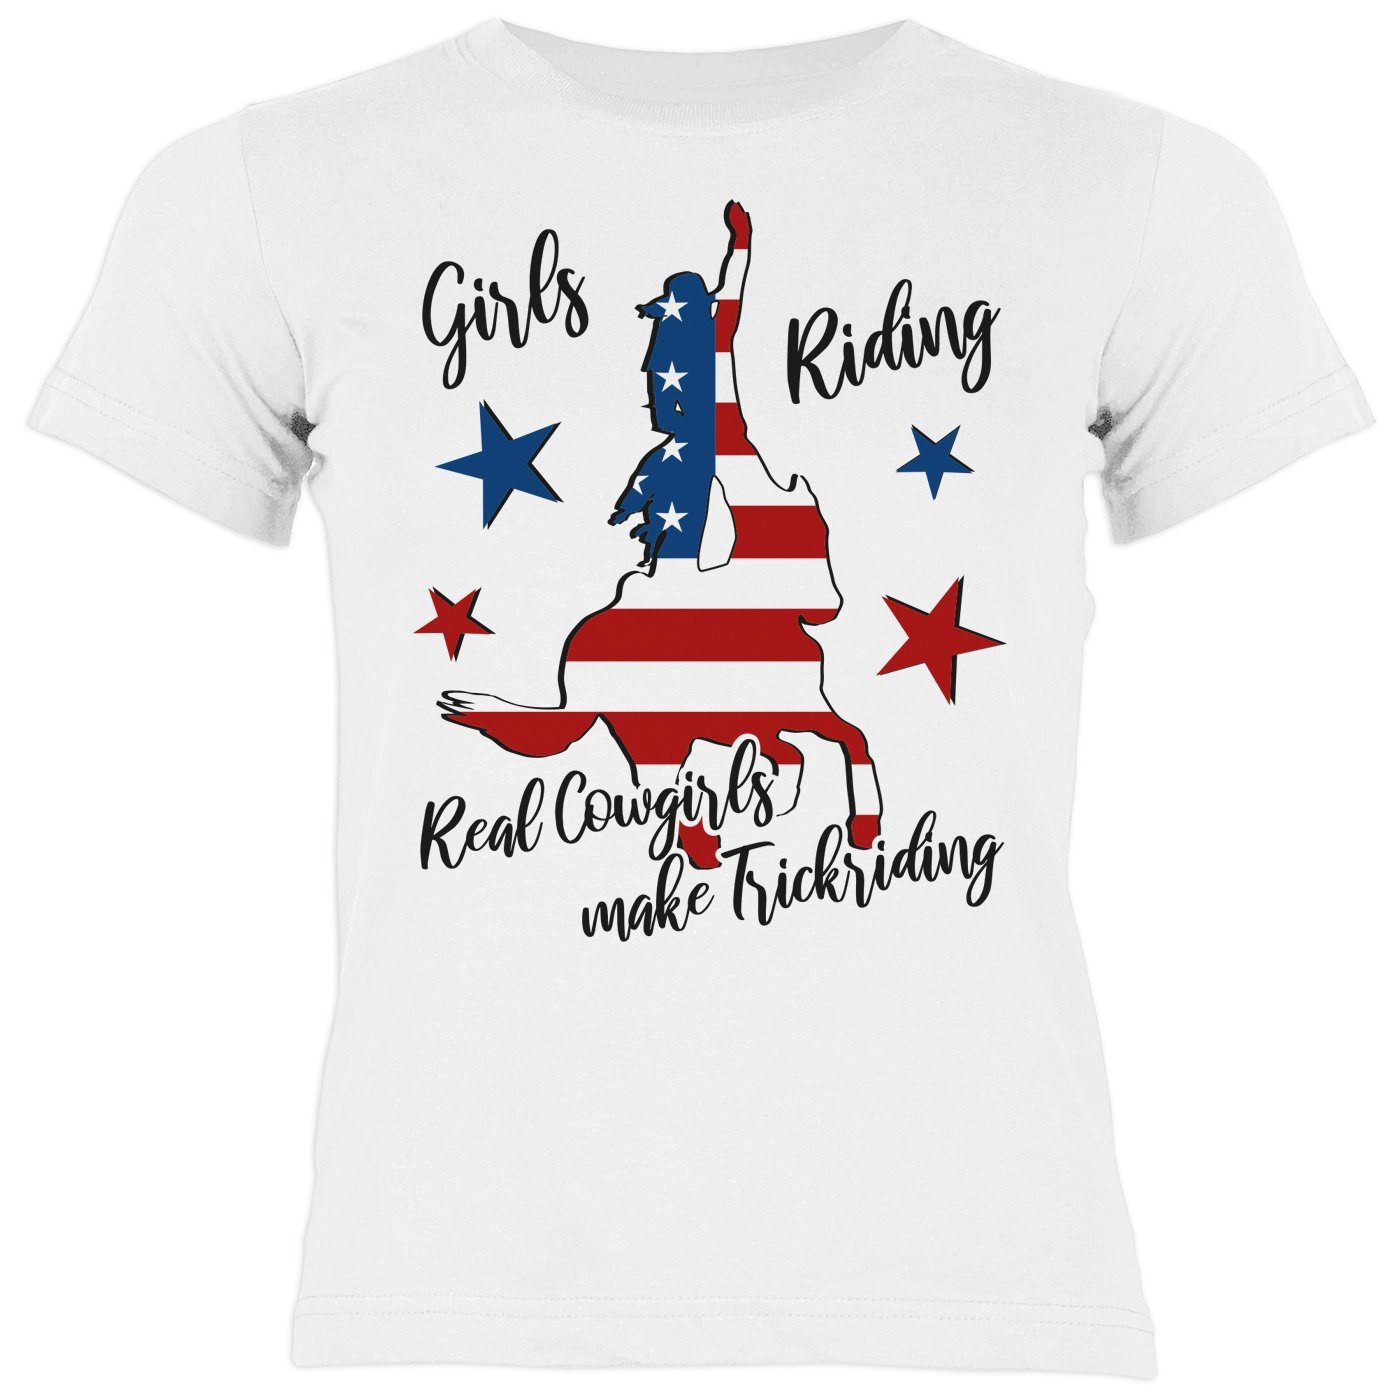 Tini - Shirts Cowgirl Real Trickreiter : Shirt T-Shirt Trickriding Kinder Trickriding T-Shirt Riding make Motiv Cowgirls Trickreiter Kindershirt Girls